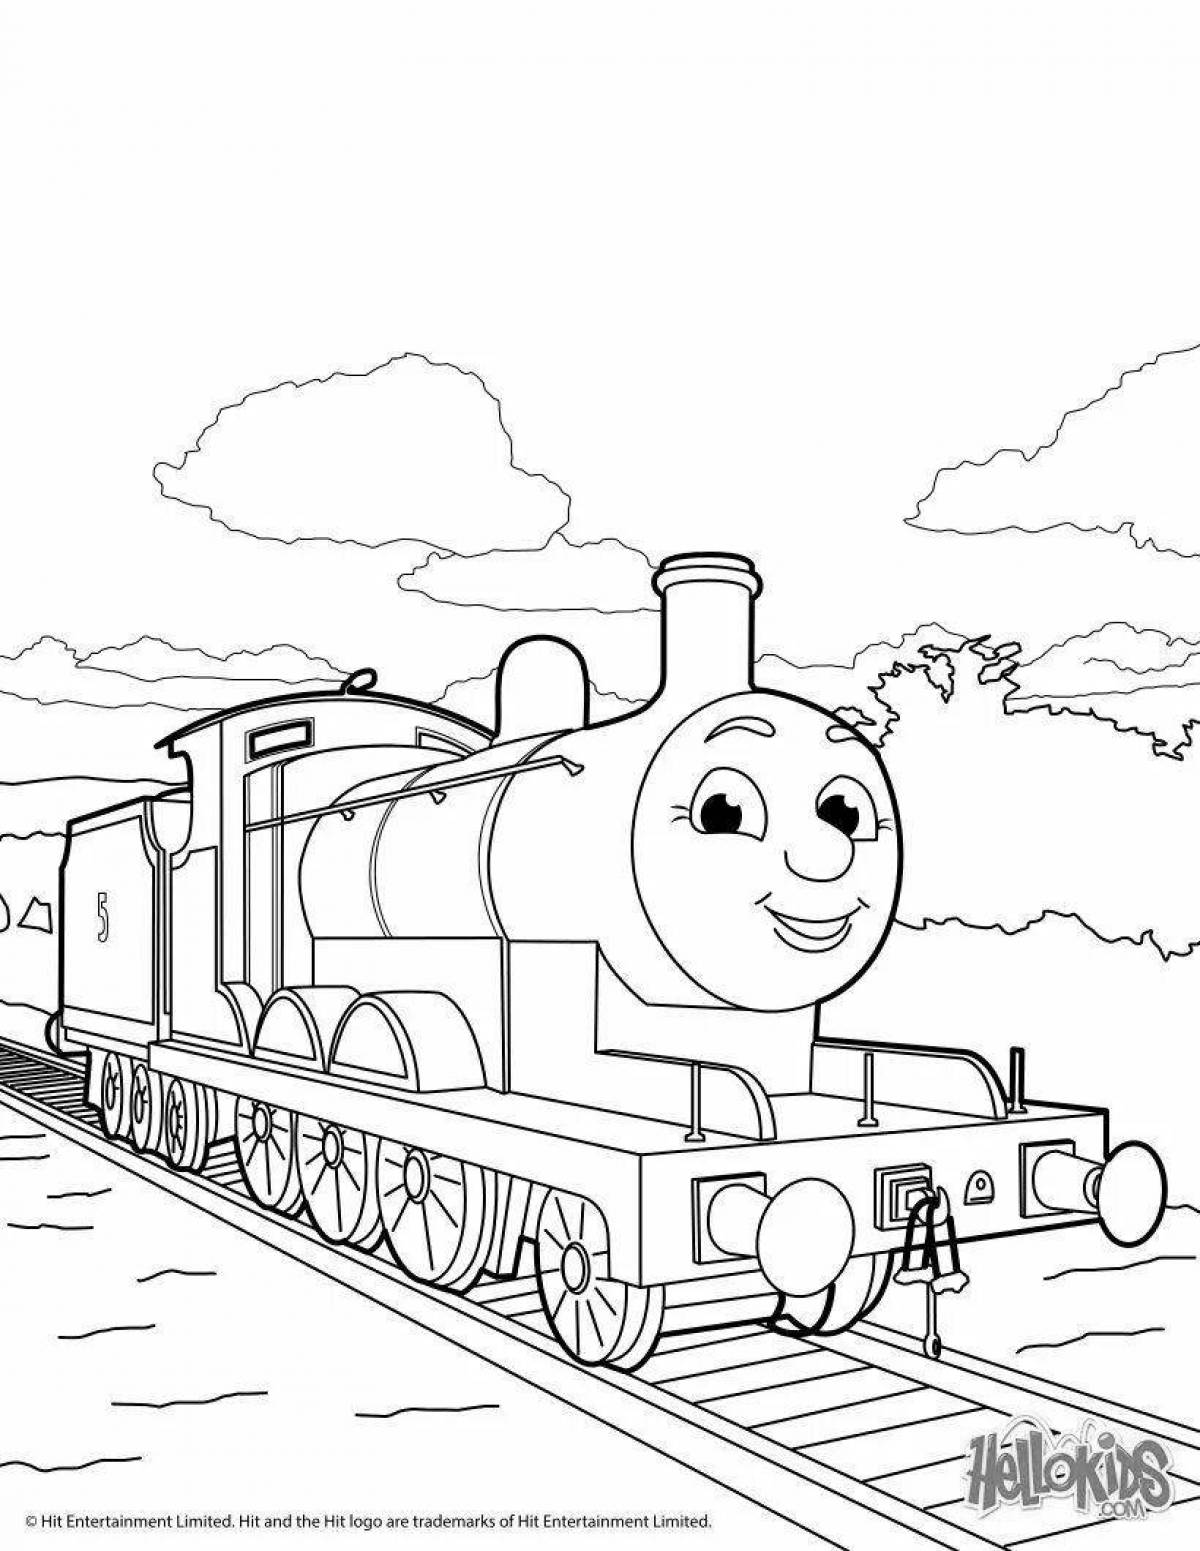 Charlie the engine coloring book